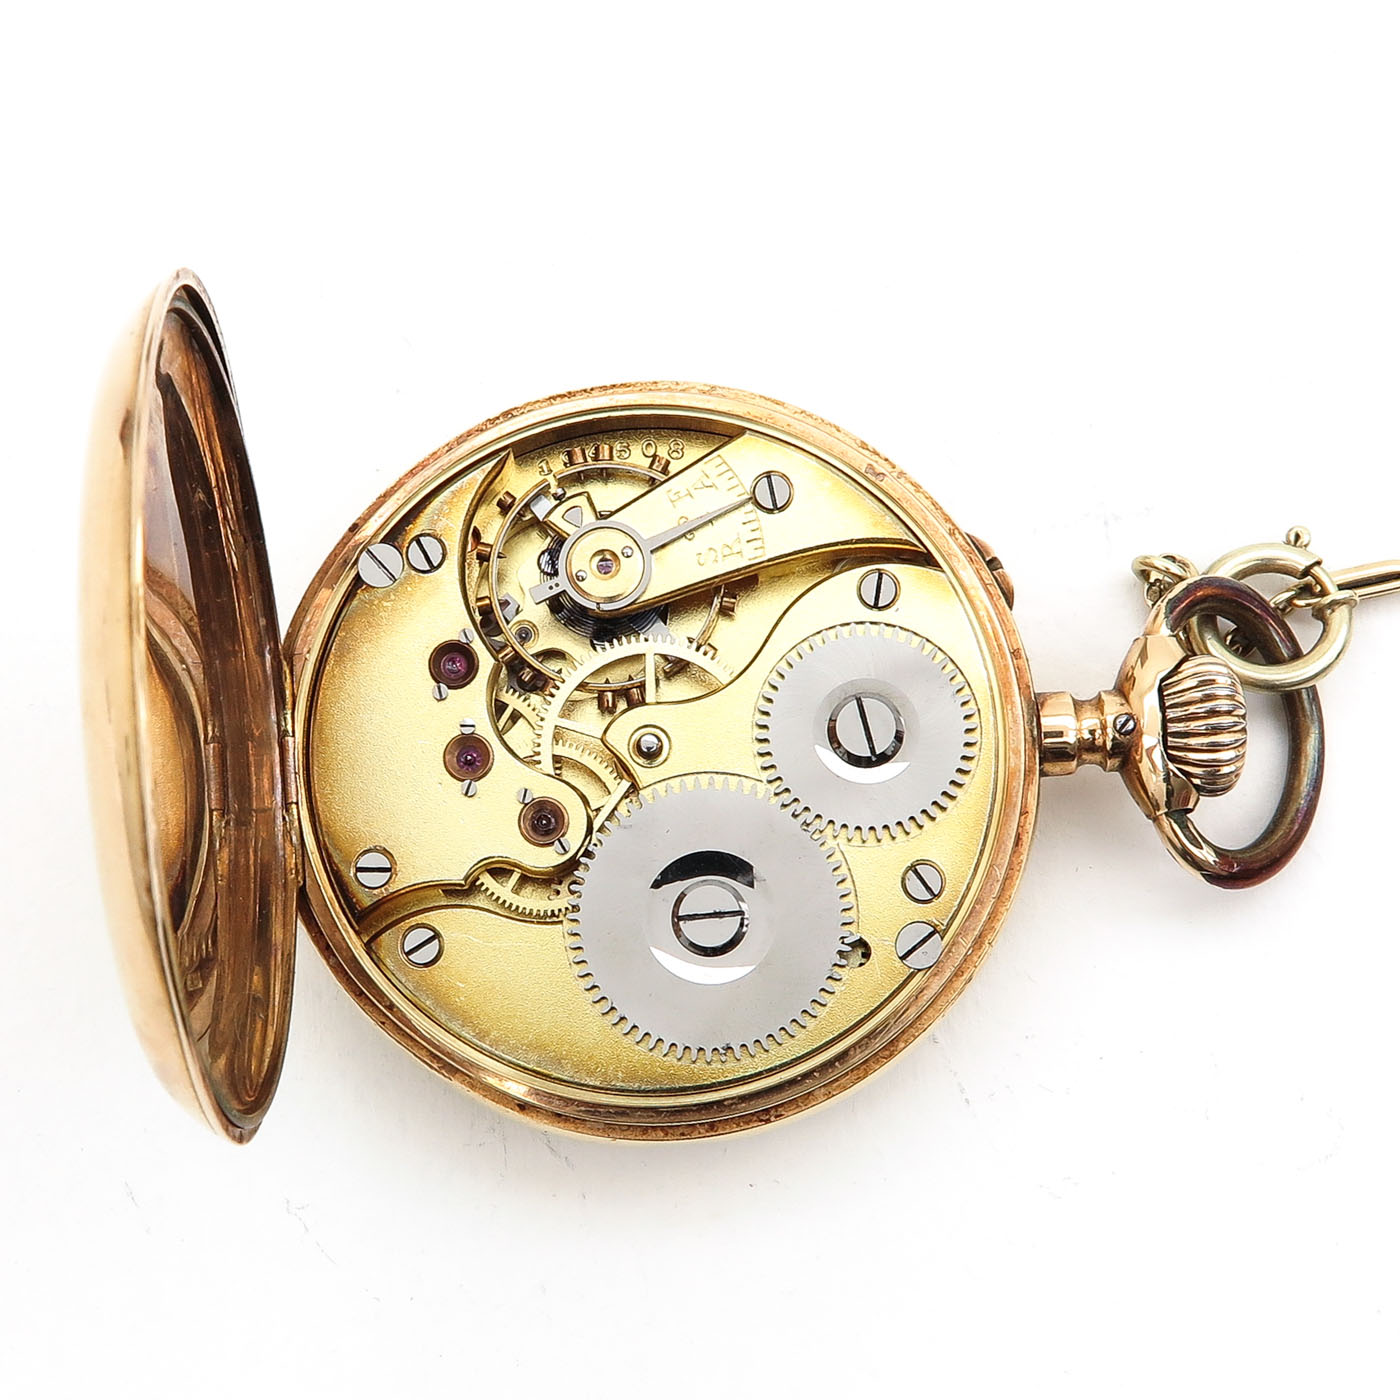 An IWC Pocket Watch - Image 6 of 6